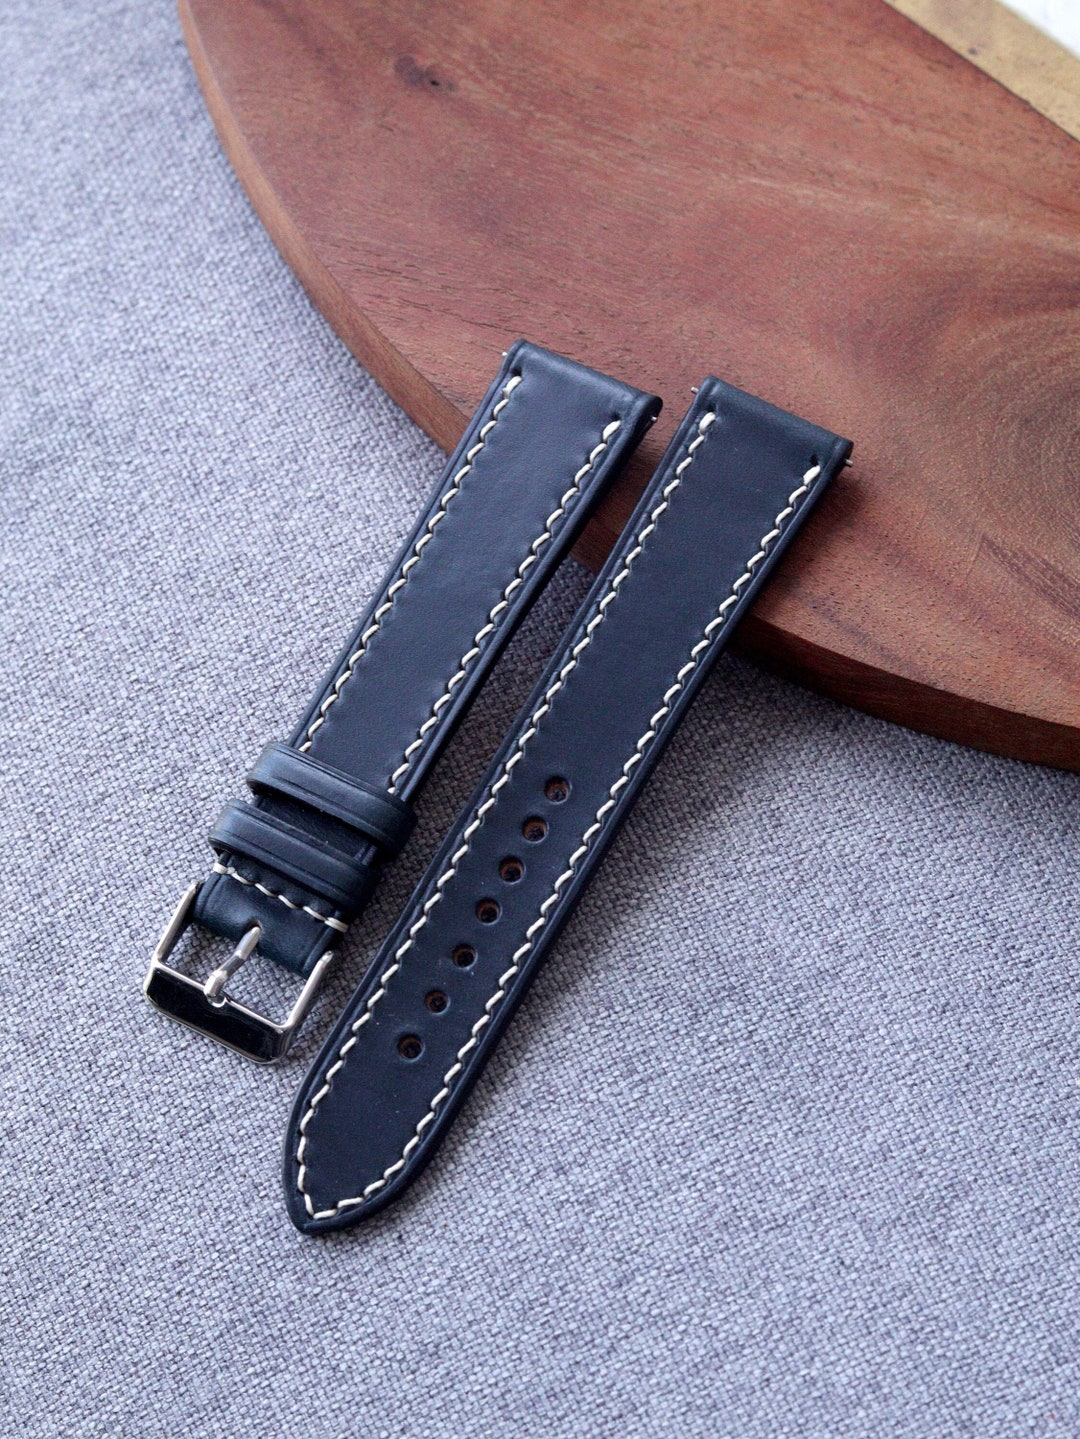 Navy blue Horween Chromexcel leather watch strap band 100% Etsy 日本